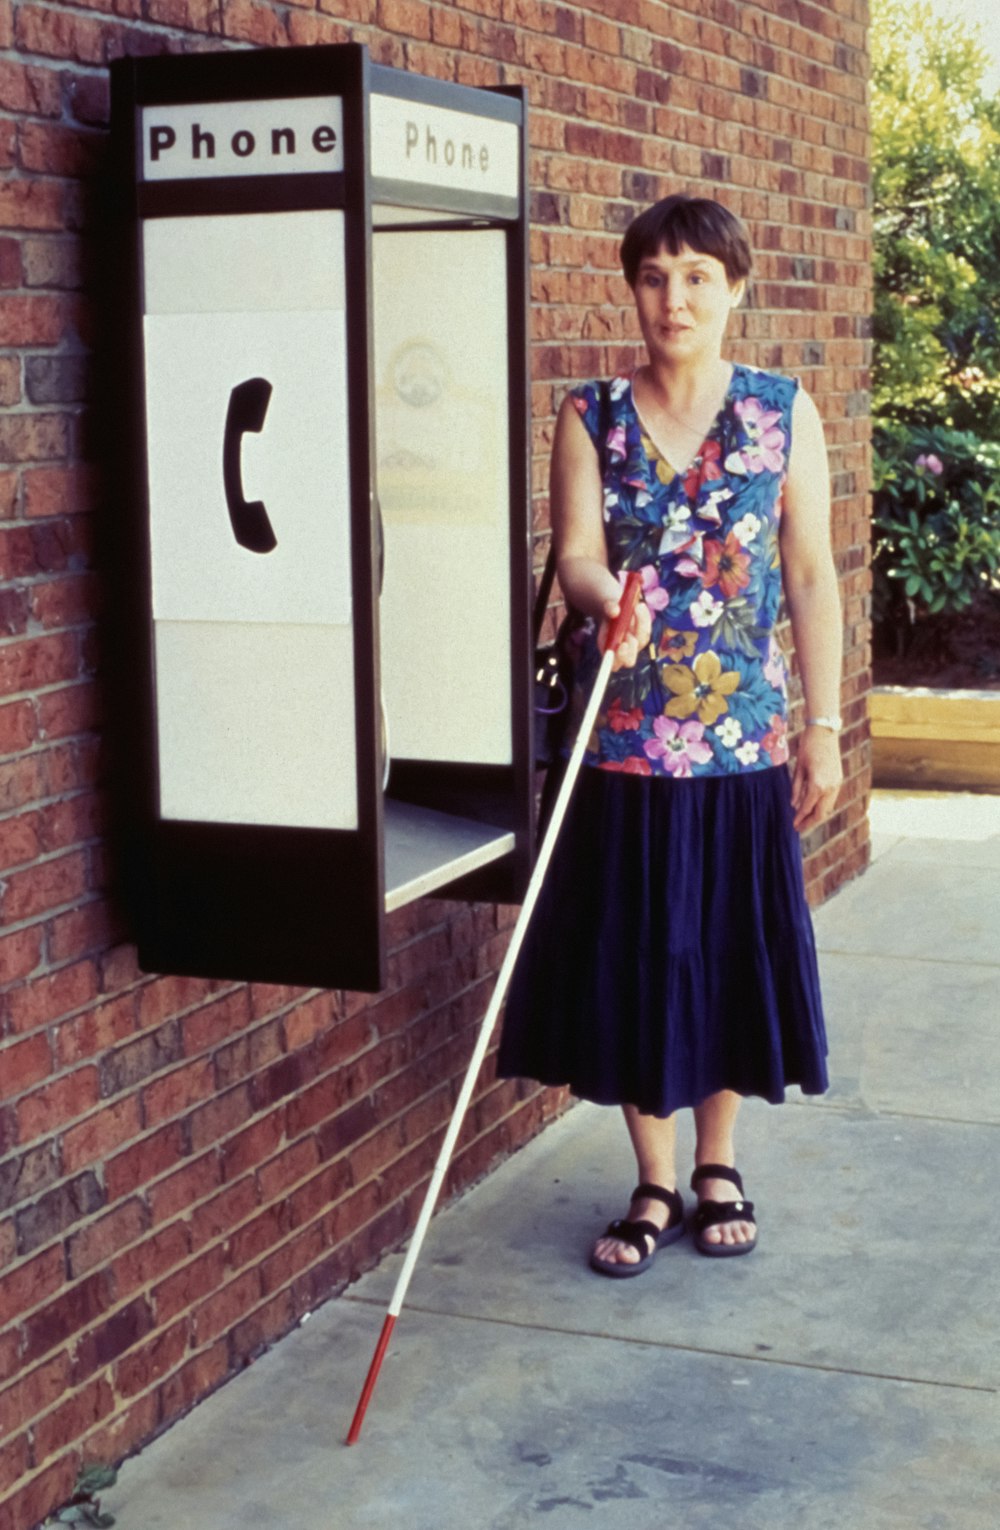 a woman standing next to a phone booth